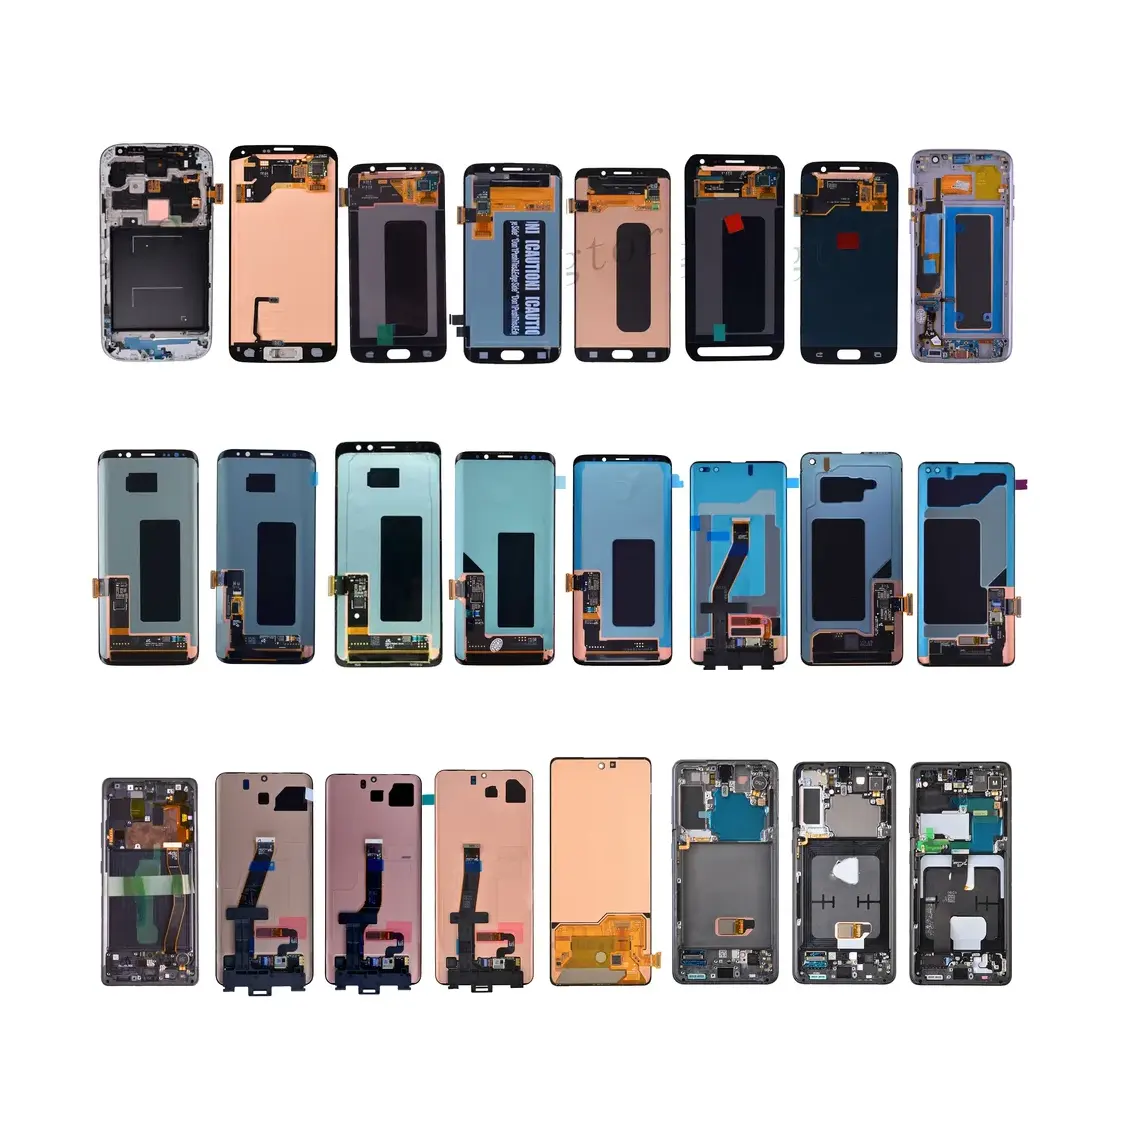 display lcd screen for samsung galaxy s6 s7 s8 s9 edge plus s8+ s9+ s10 s10e s10+ s20 s20+ s21 s22 s23 ultra s21+ s22+